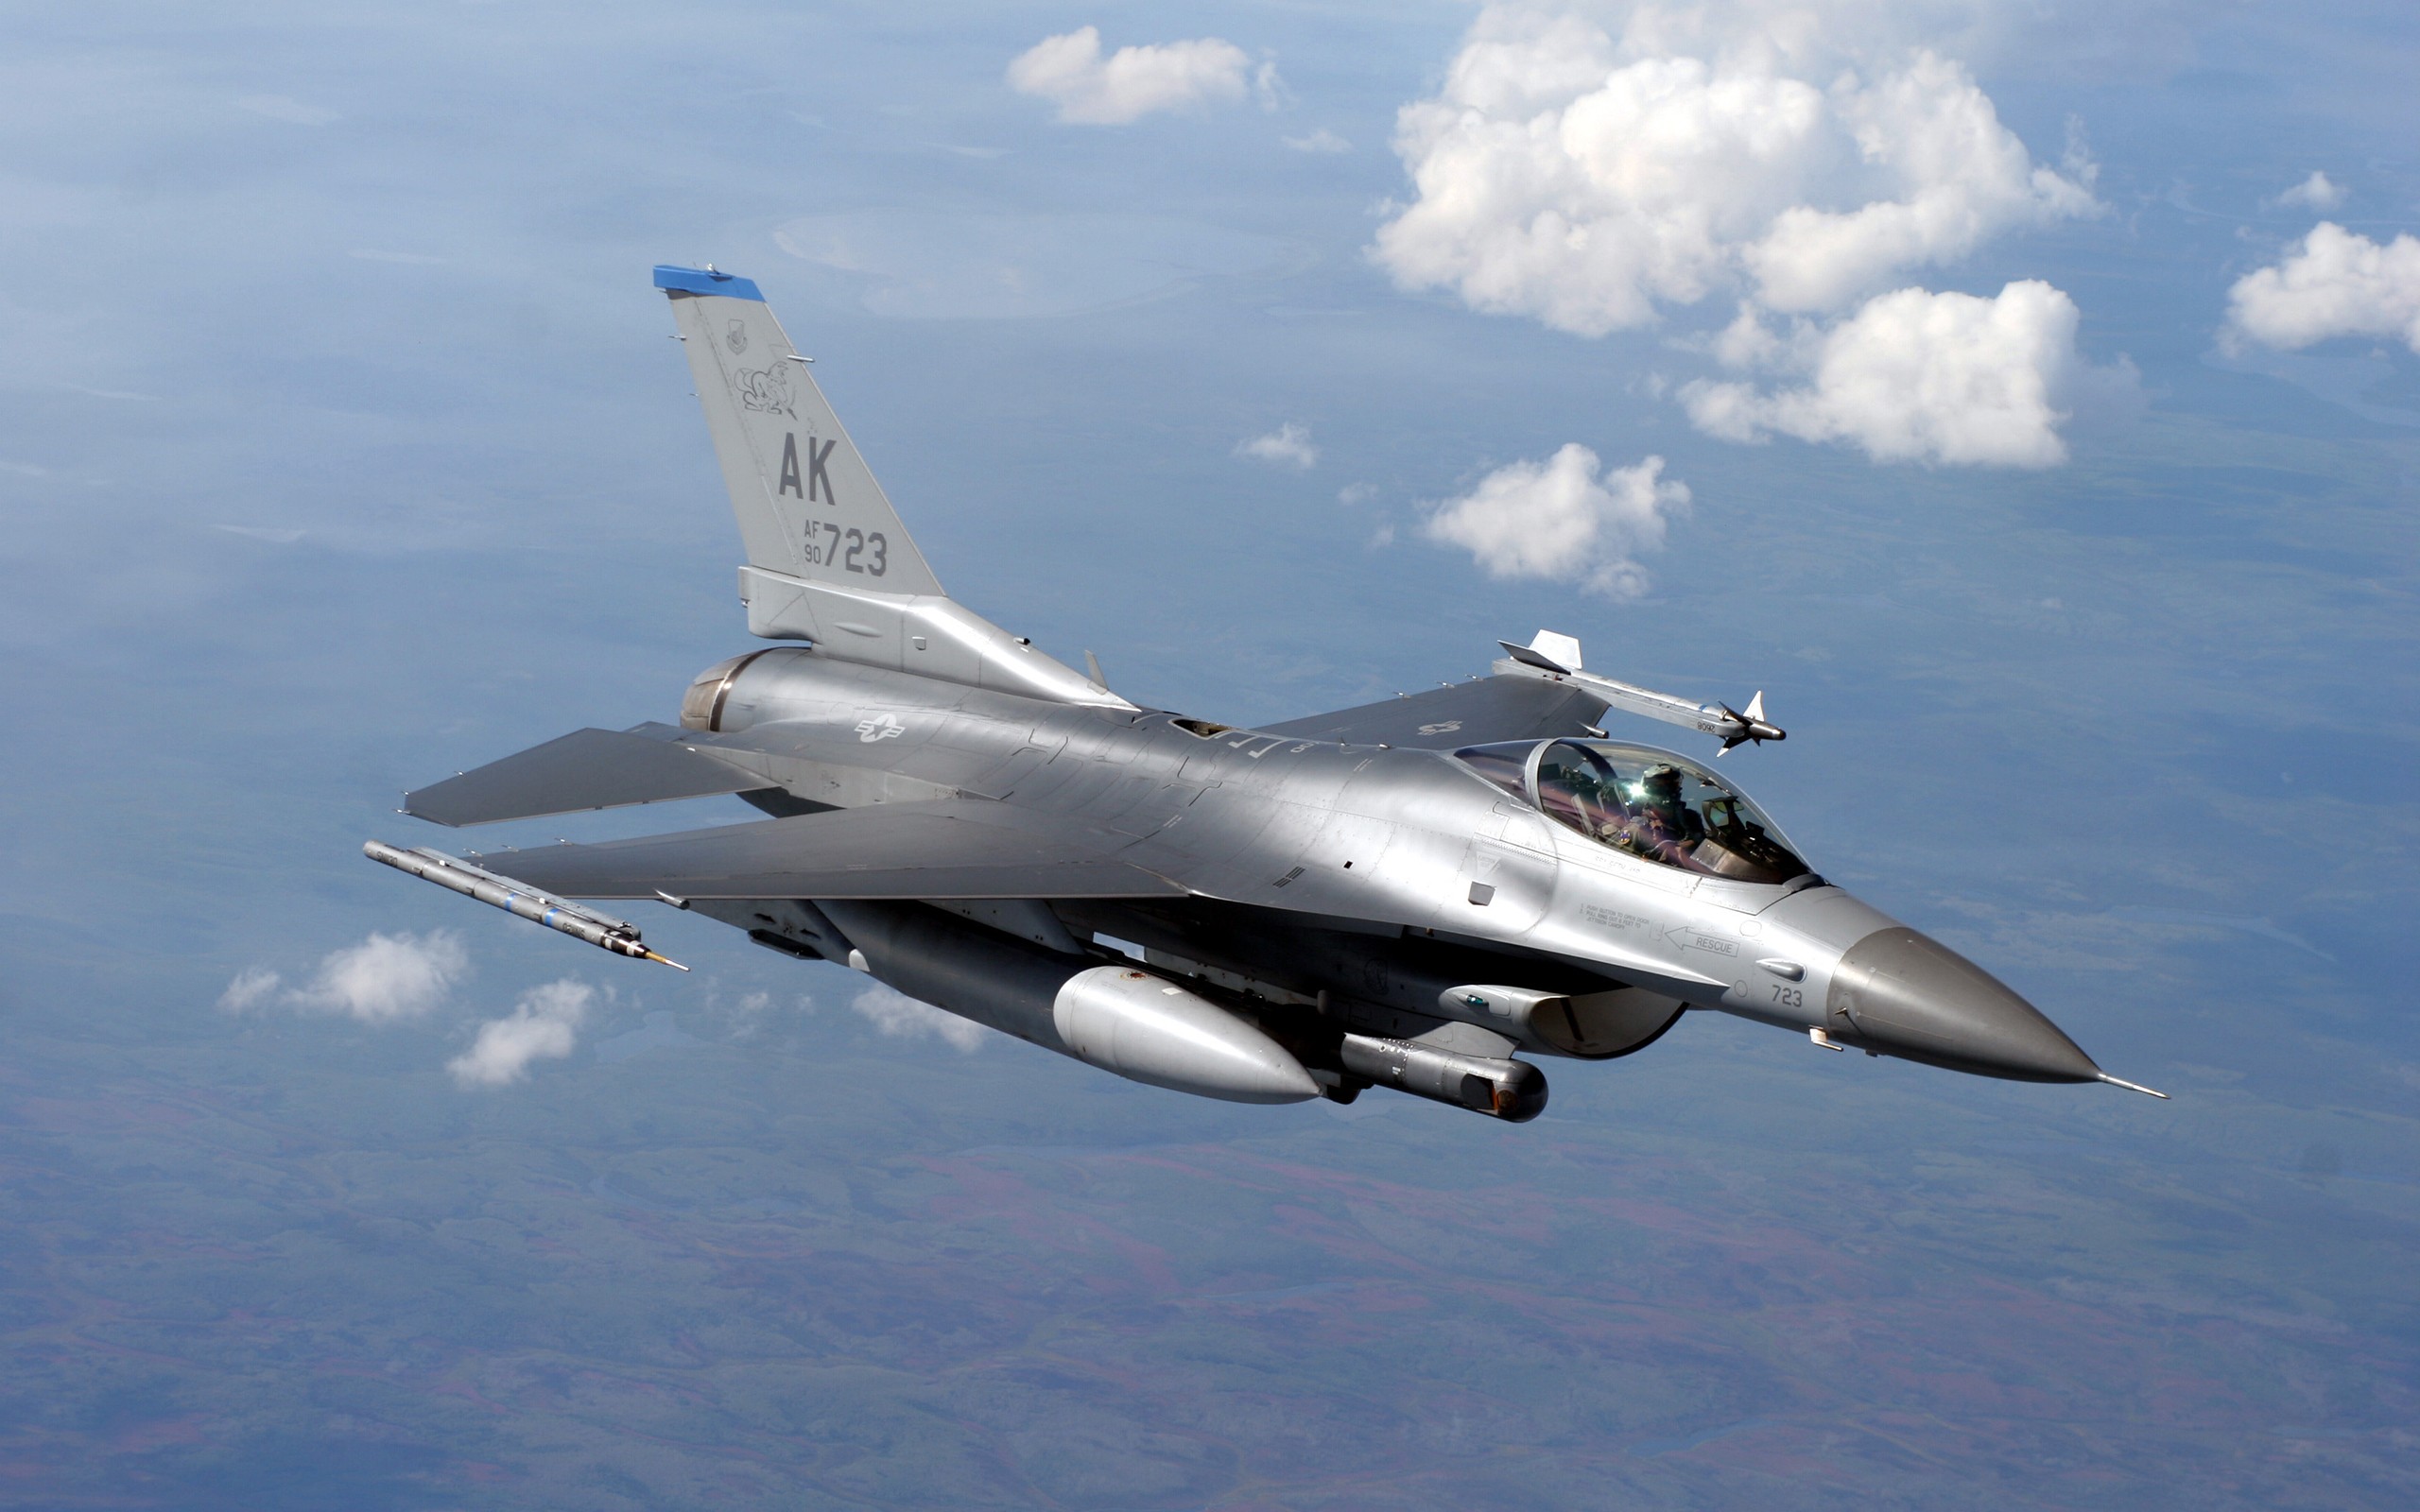 Wallpapers General dynamics f-16 fighting Falcon aircraft military aircraft aviation on the desktop